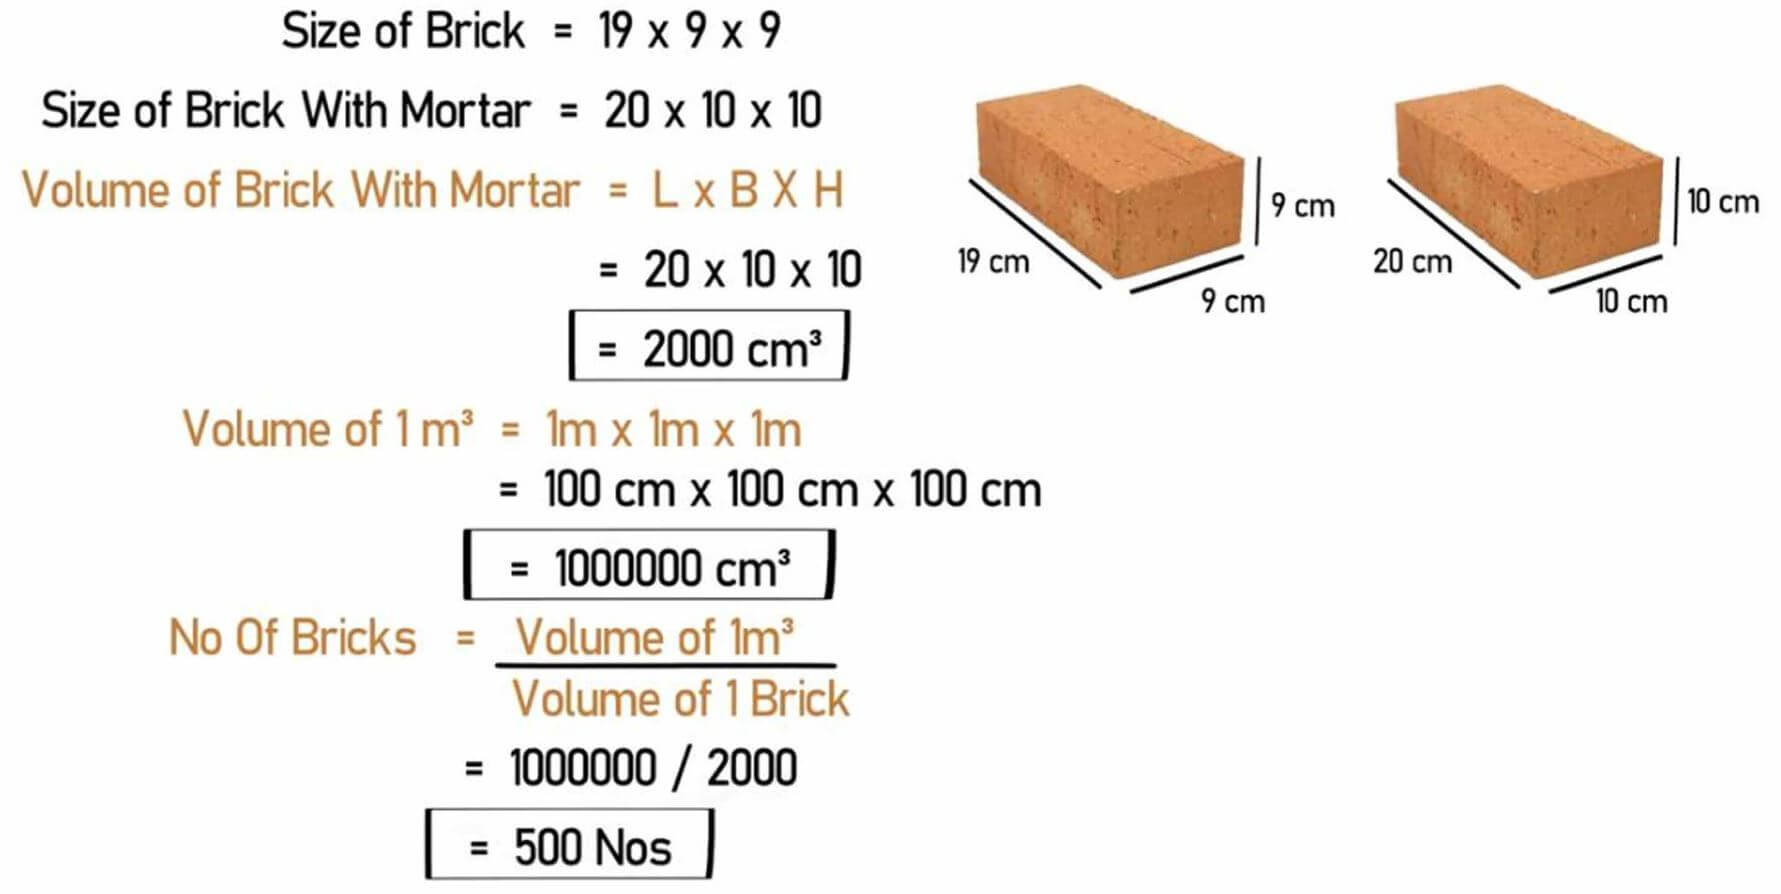 How Many Bricks Are Used In 1m3? - Engineering Discoveries